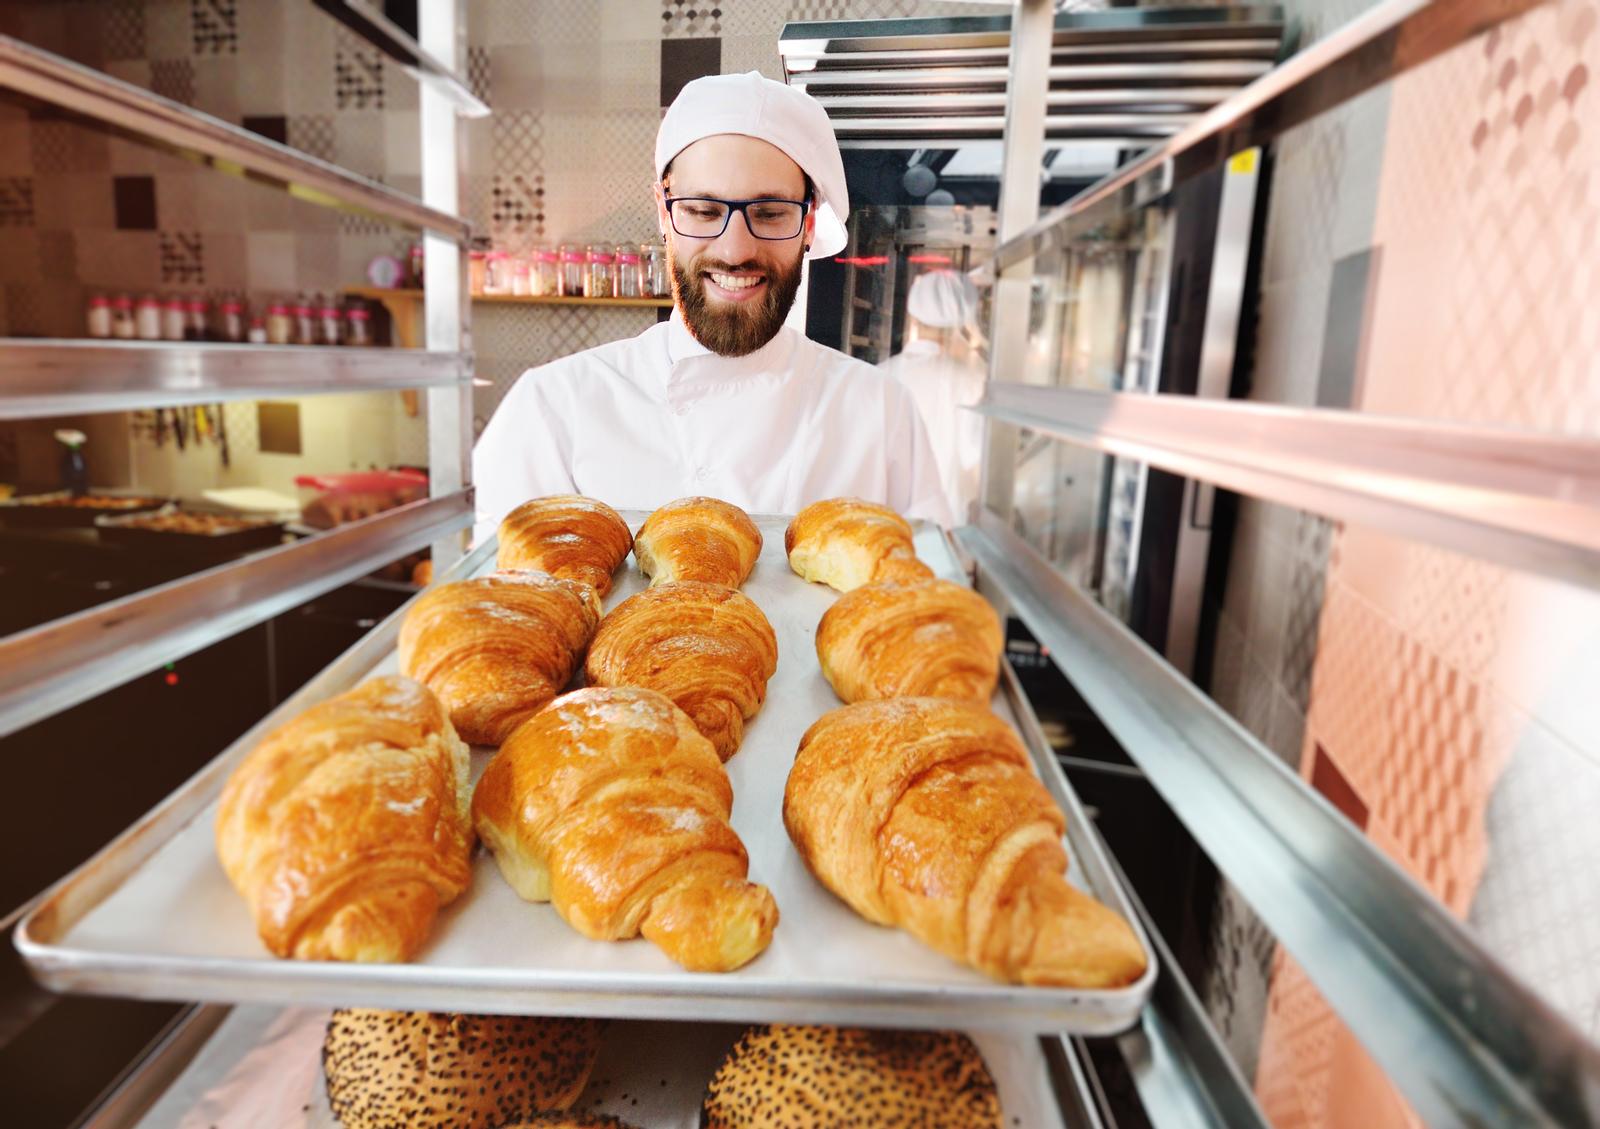 DESSERDIVABRIK OÜ - Manufacture of bread; manufacture of fresh pastry goods and cakes in Tallinn